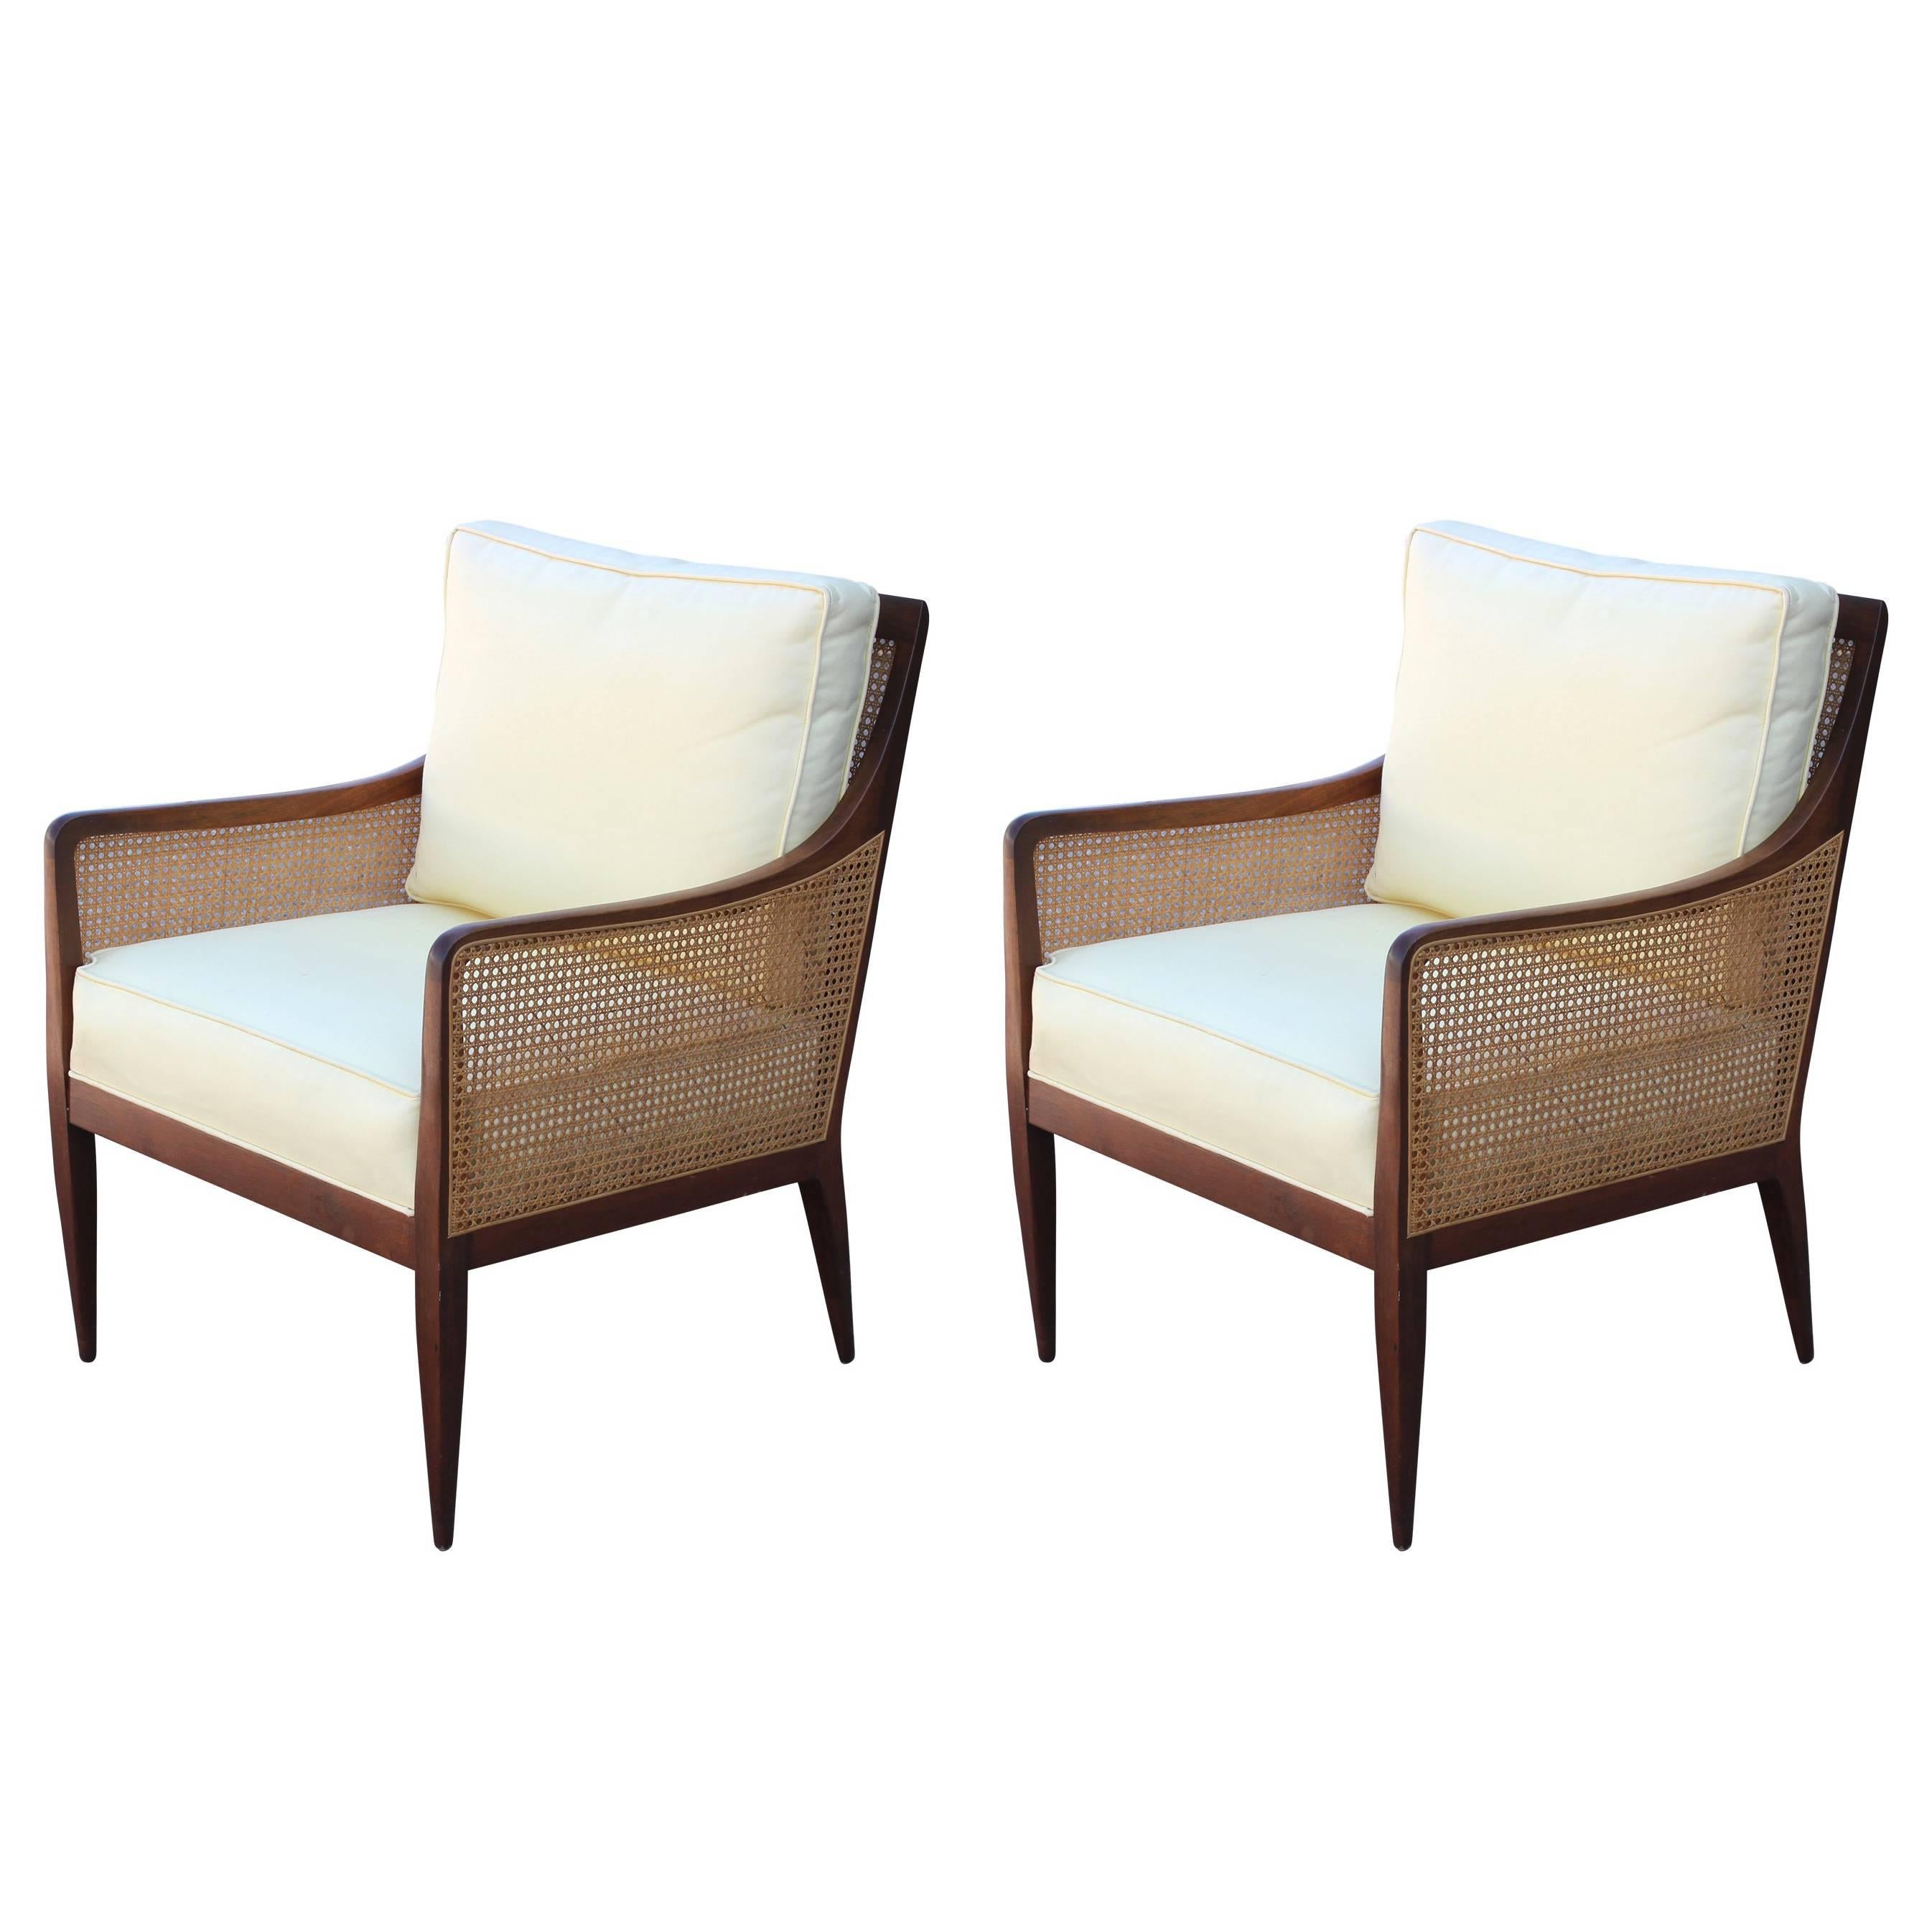 Pair of Modern Kipp Stewart for Directional Cane Lounge Chairs